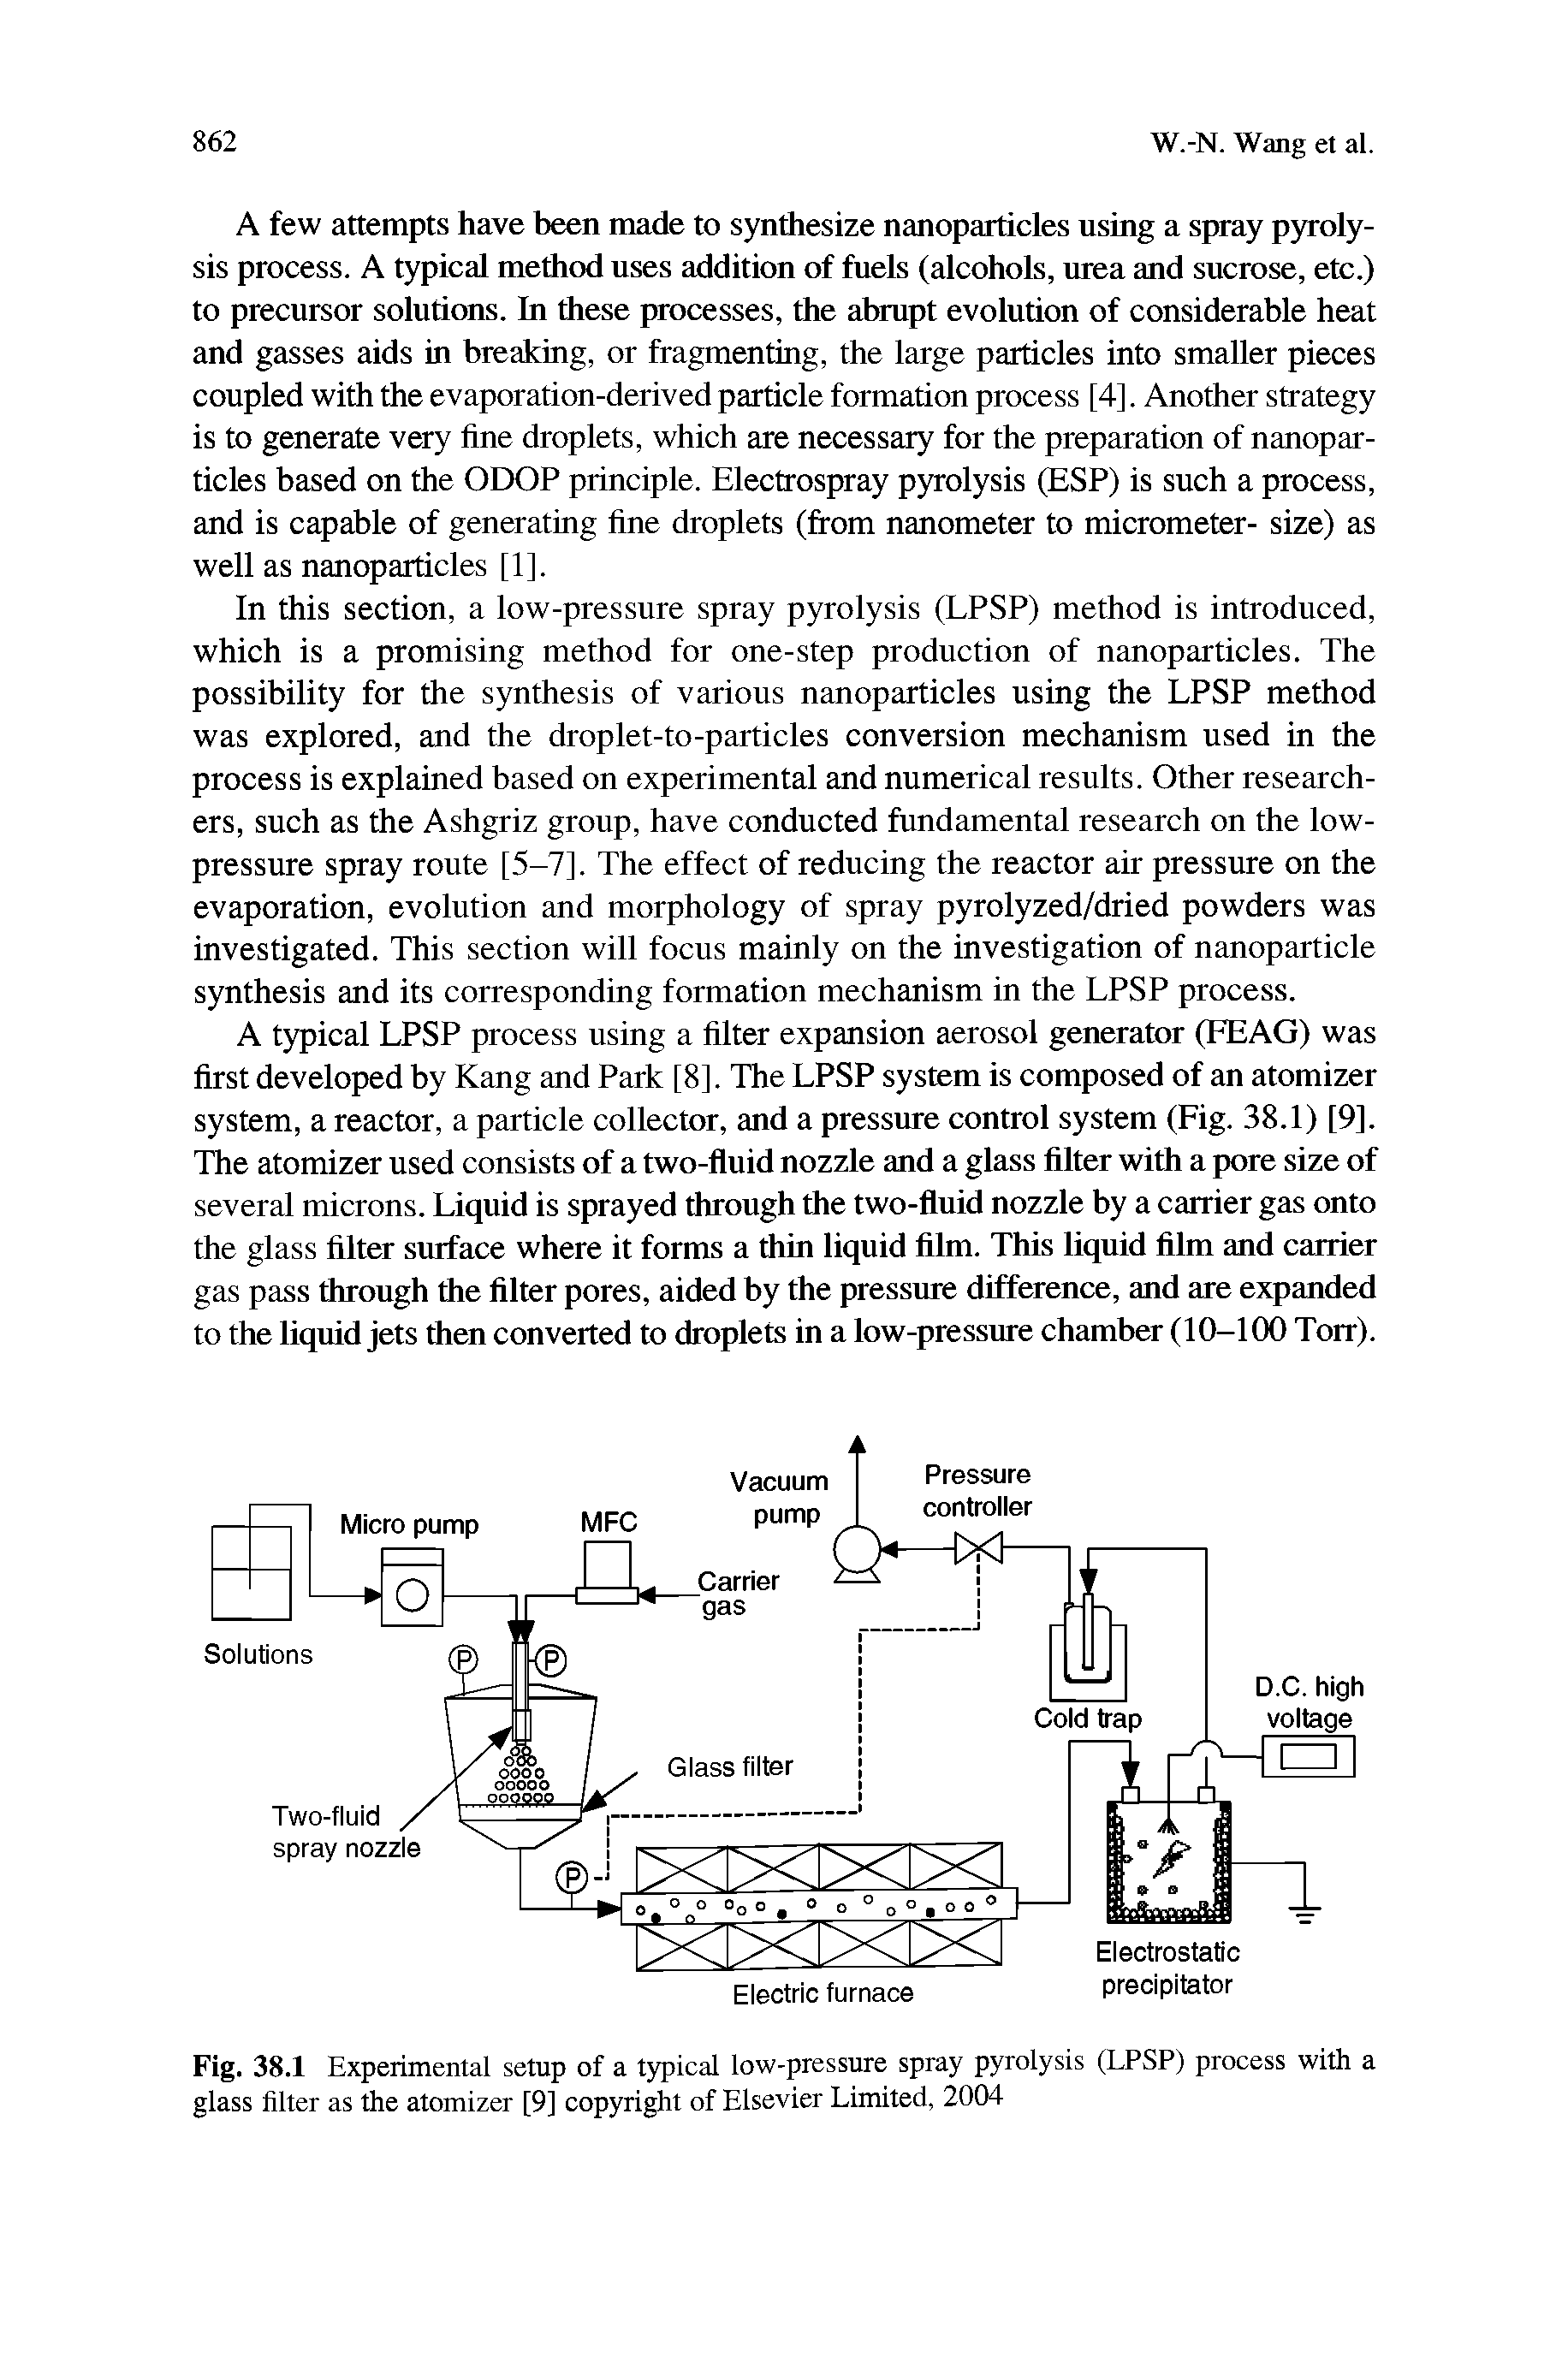 Fig. 38.1 Experimental setup of a typical low-pressure spray pyrolysis (LPSP) process with a glass filter as the atomizer [9] copyright of Elsevier Limited, 2004...